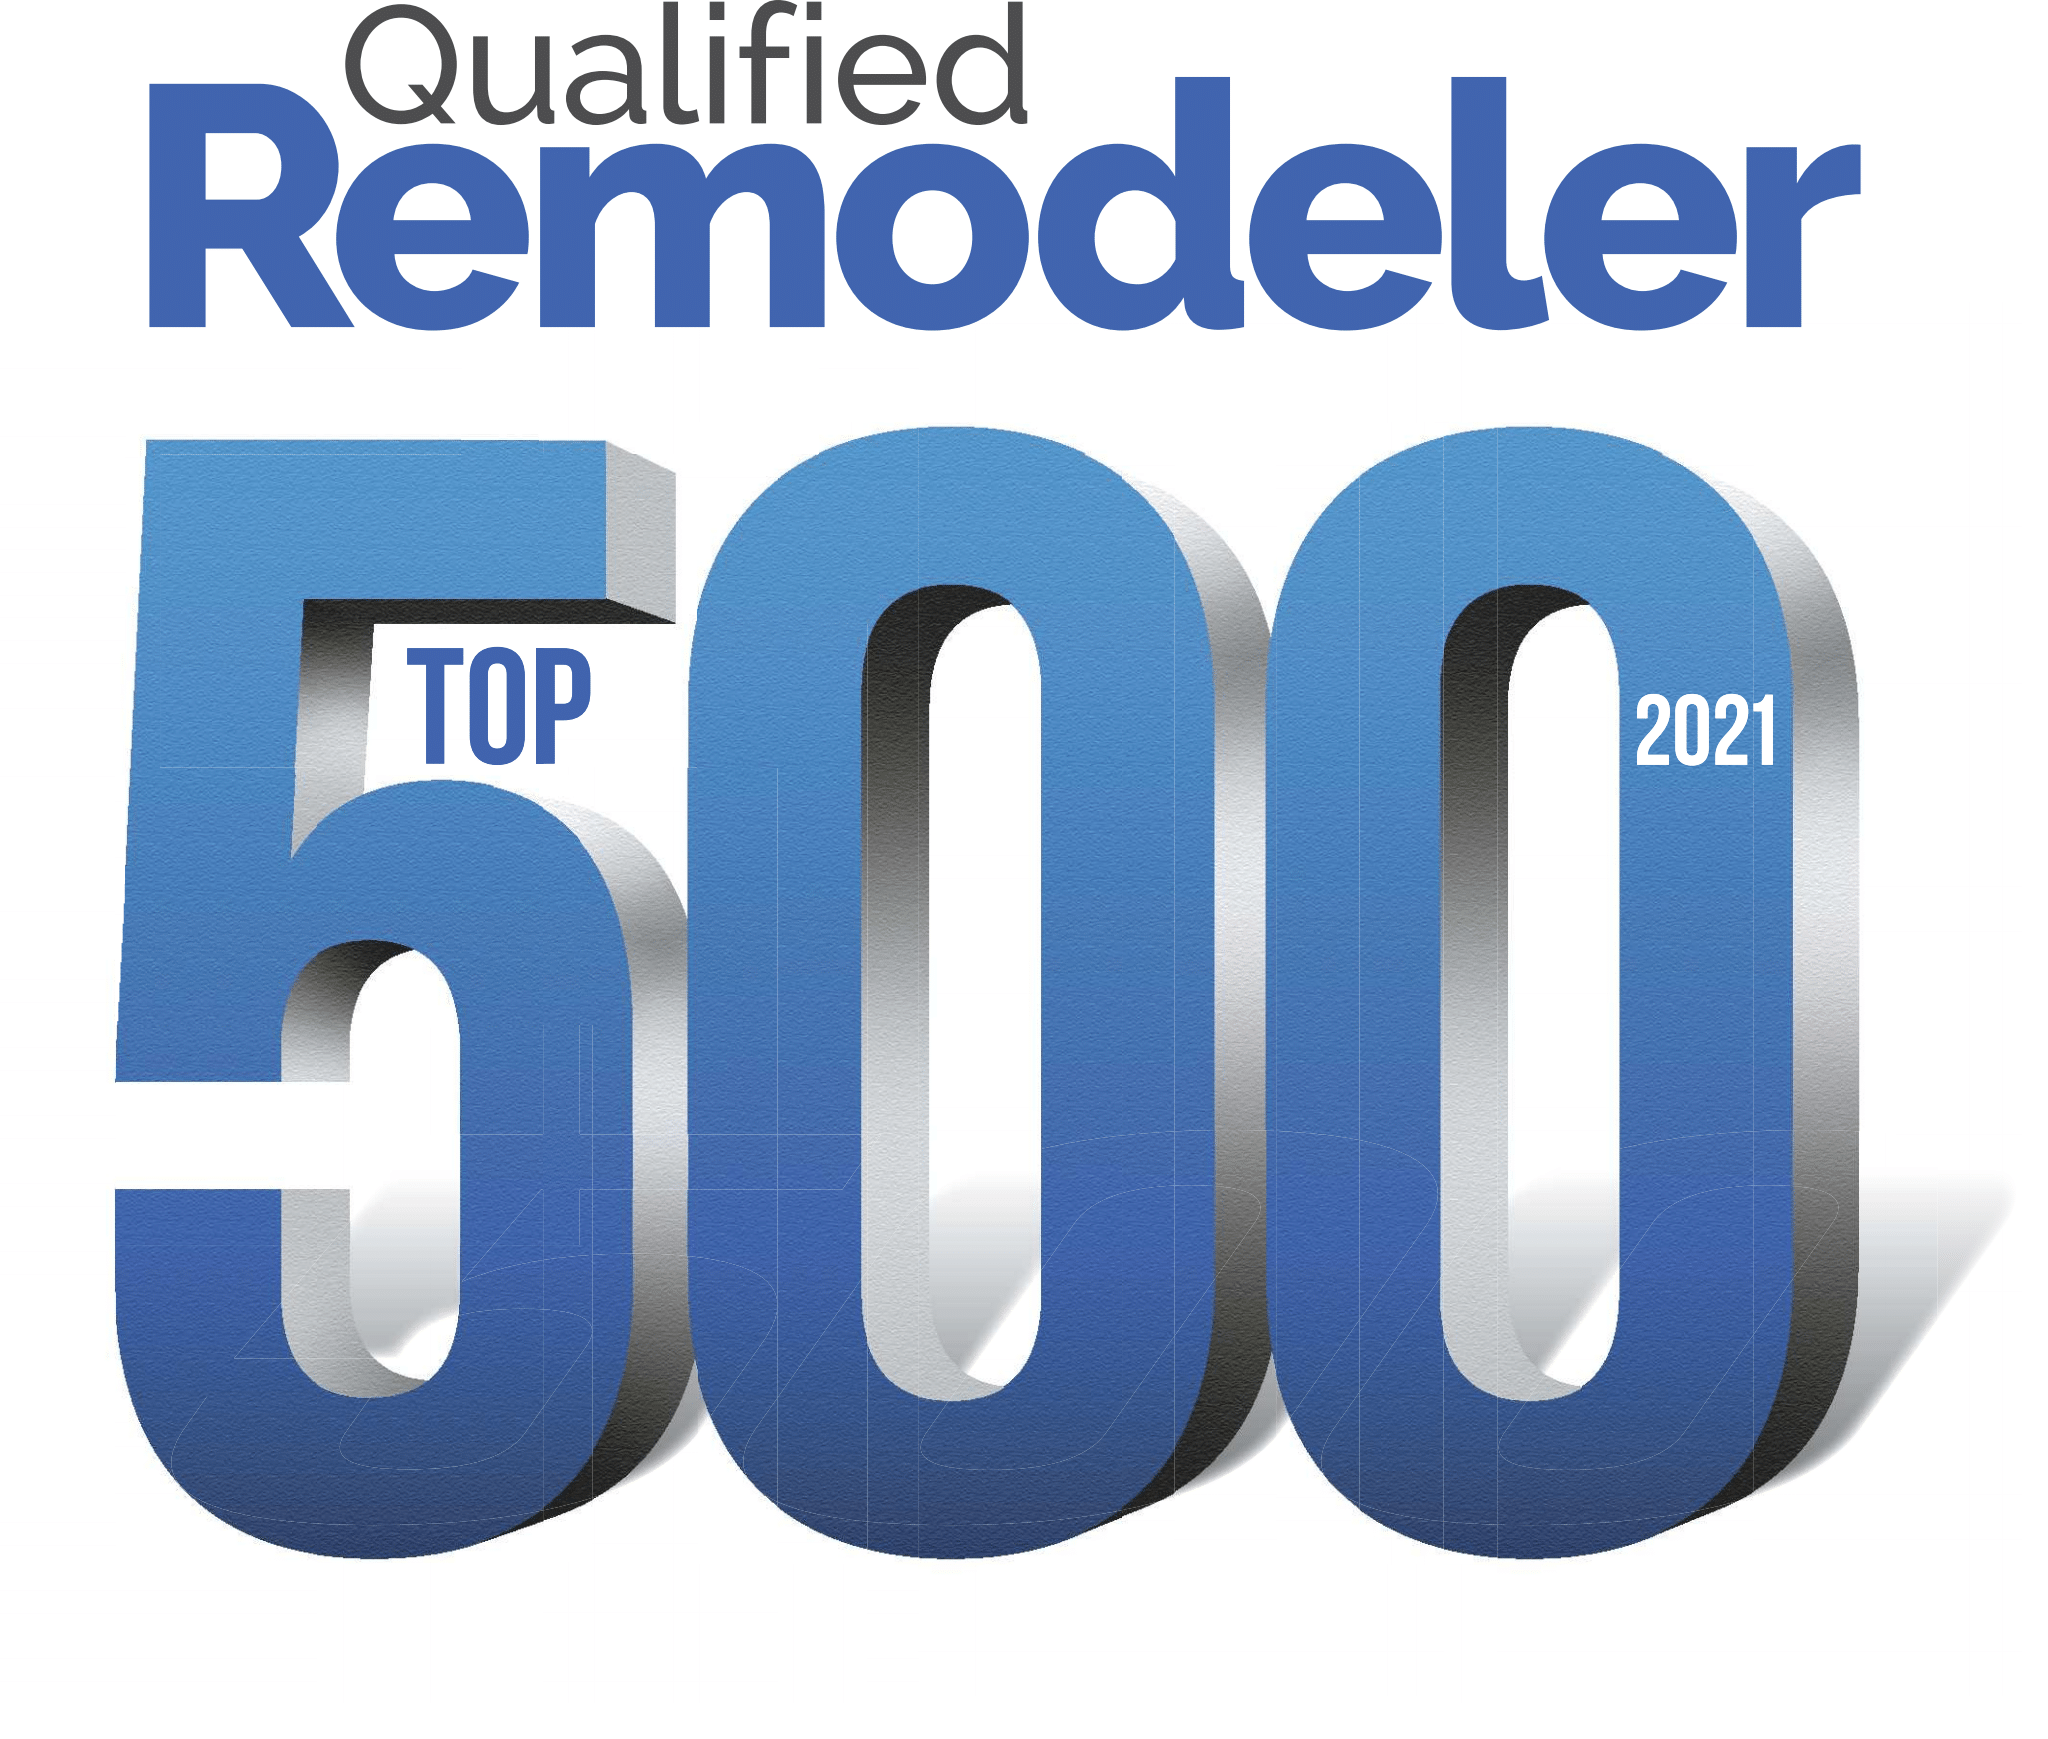 Booher Remodeling Named to Qualified Remodeler TOP 500 in 2021